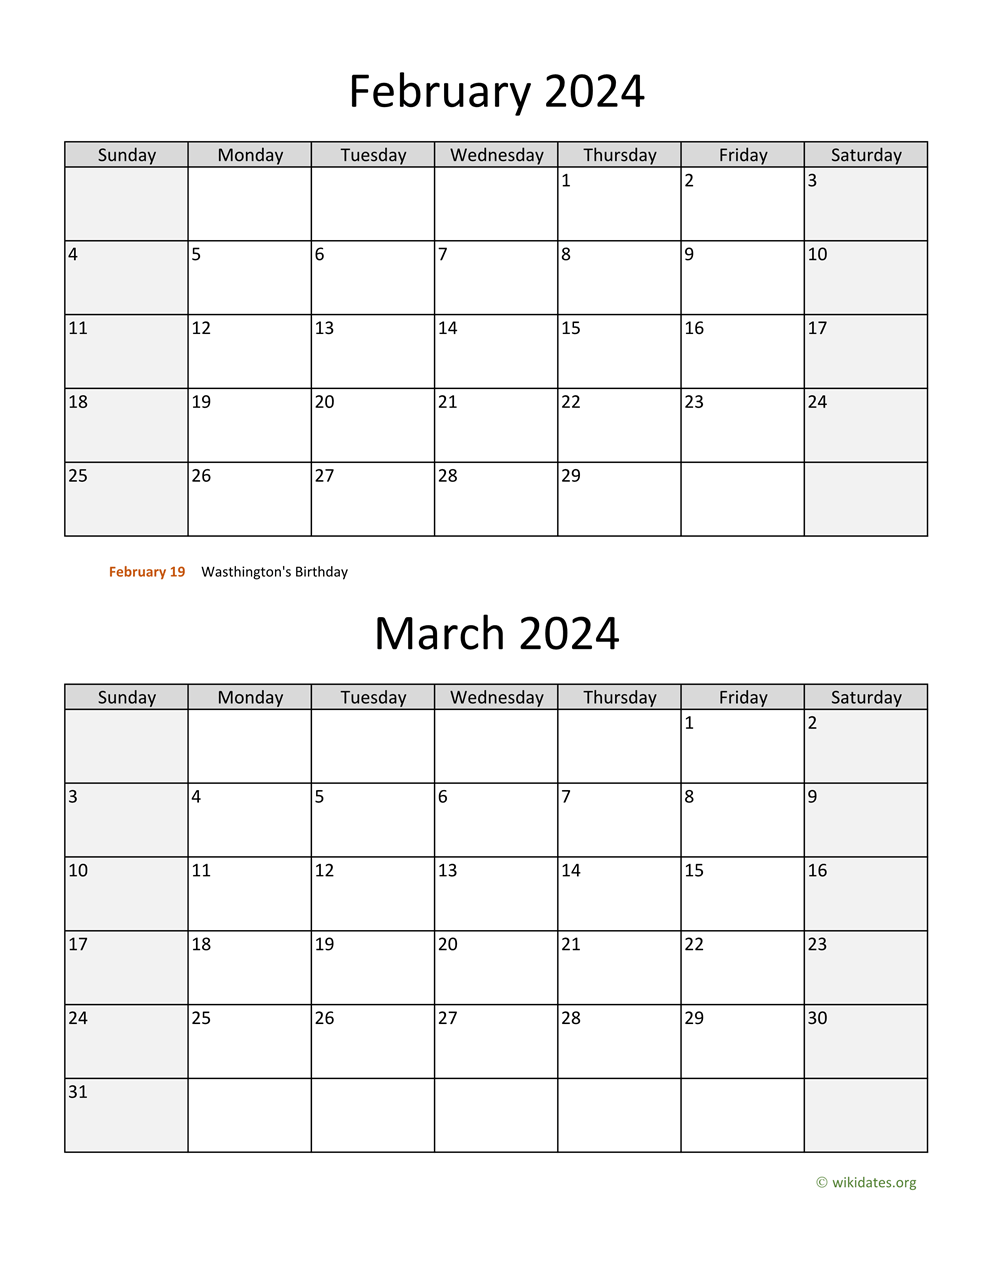 February And March 2024 Calendar | Wikidates for Printable Calendar February March April 2024